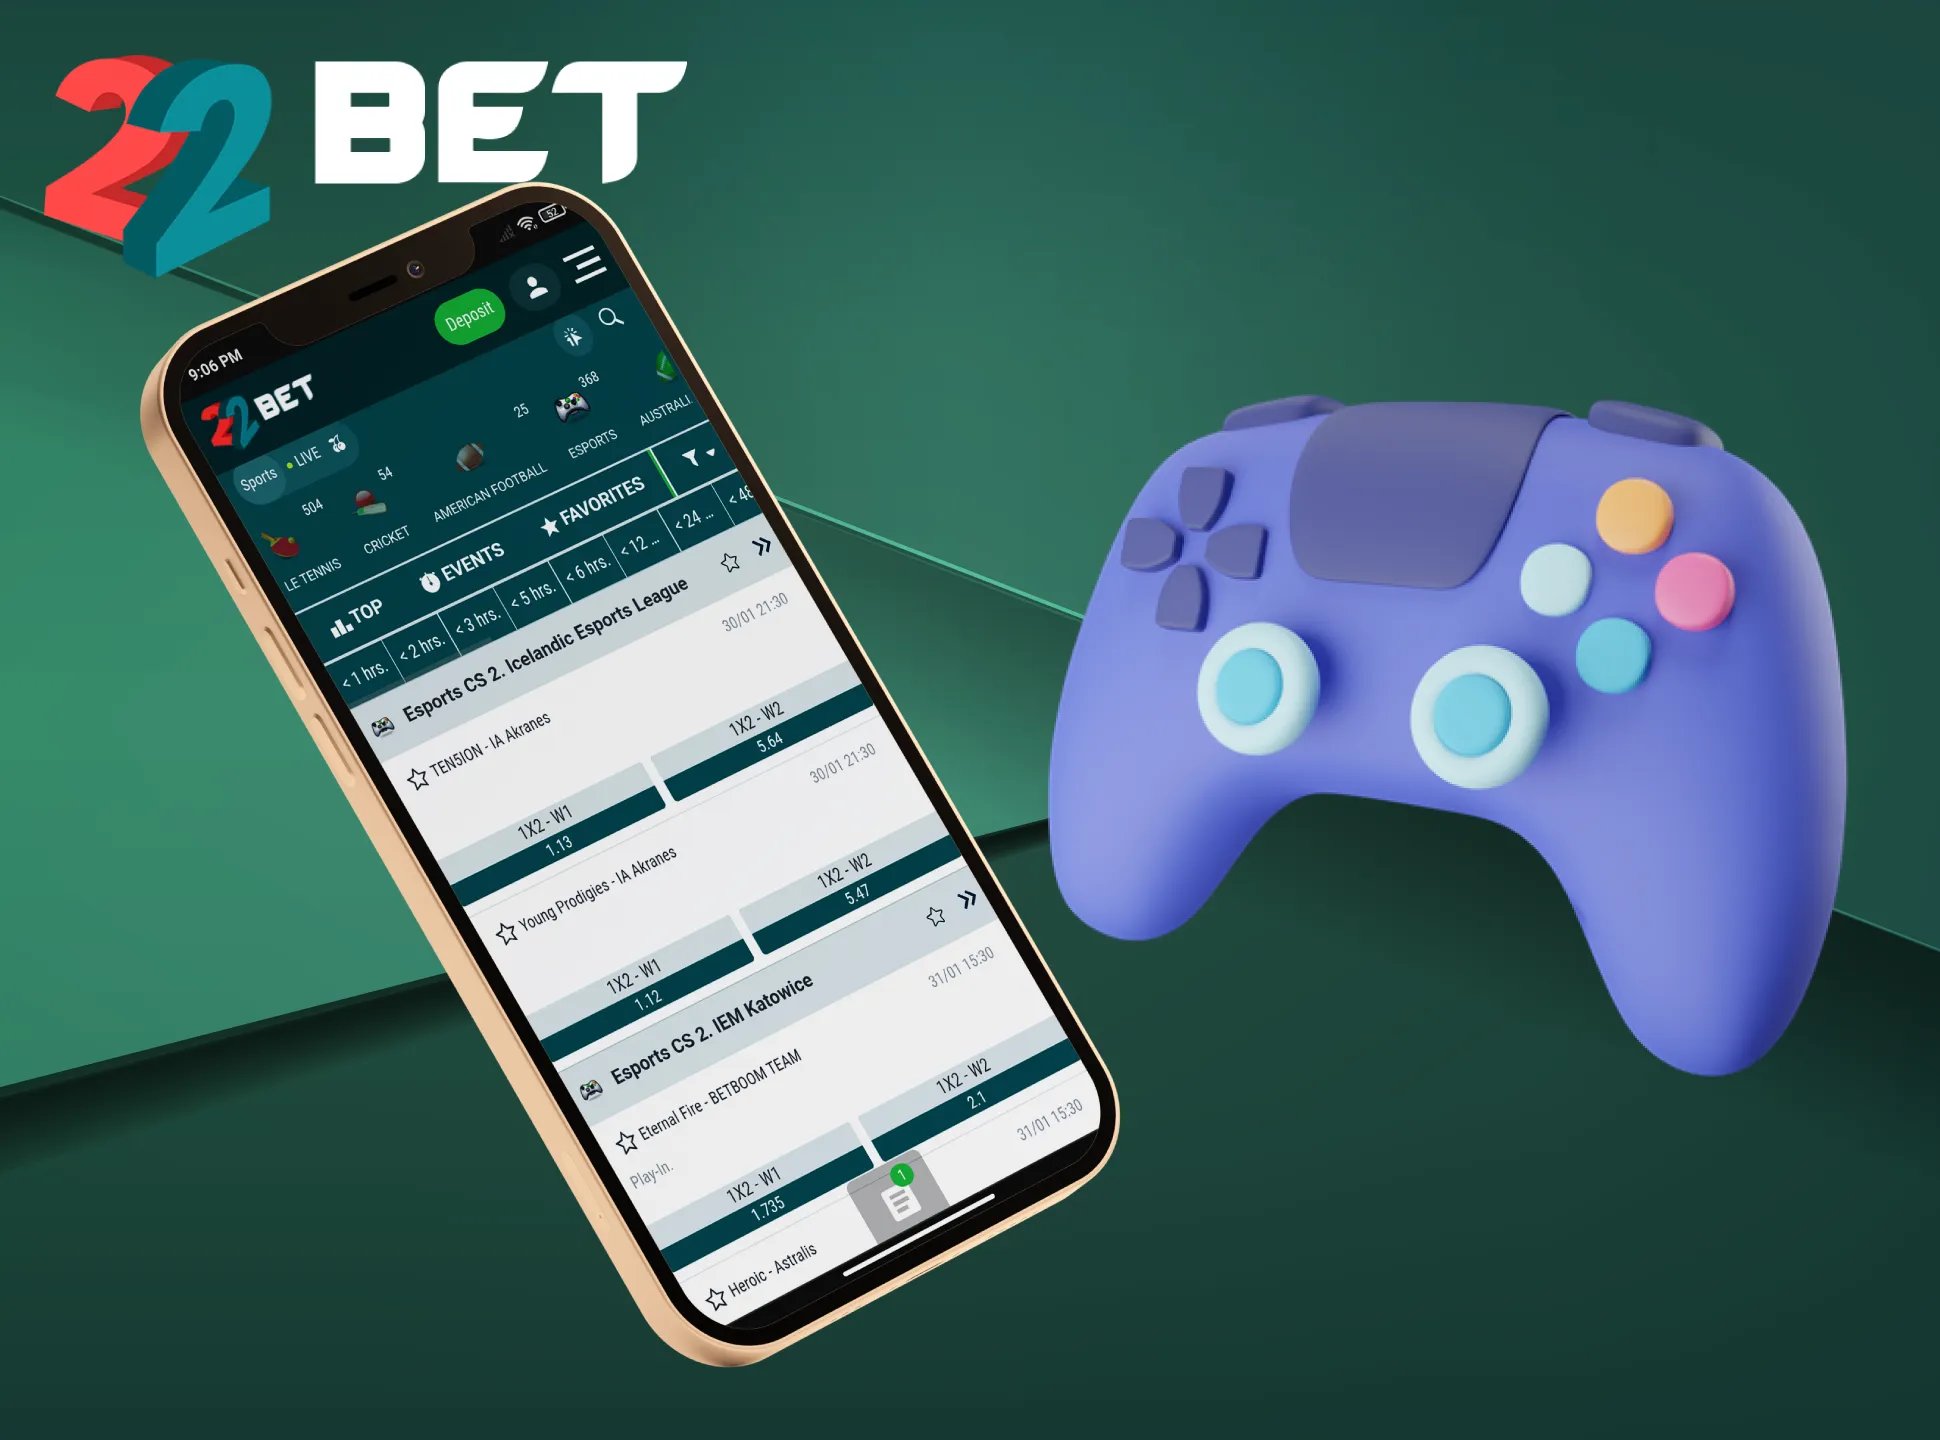 ESports betting is available on the 22Bet app.